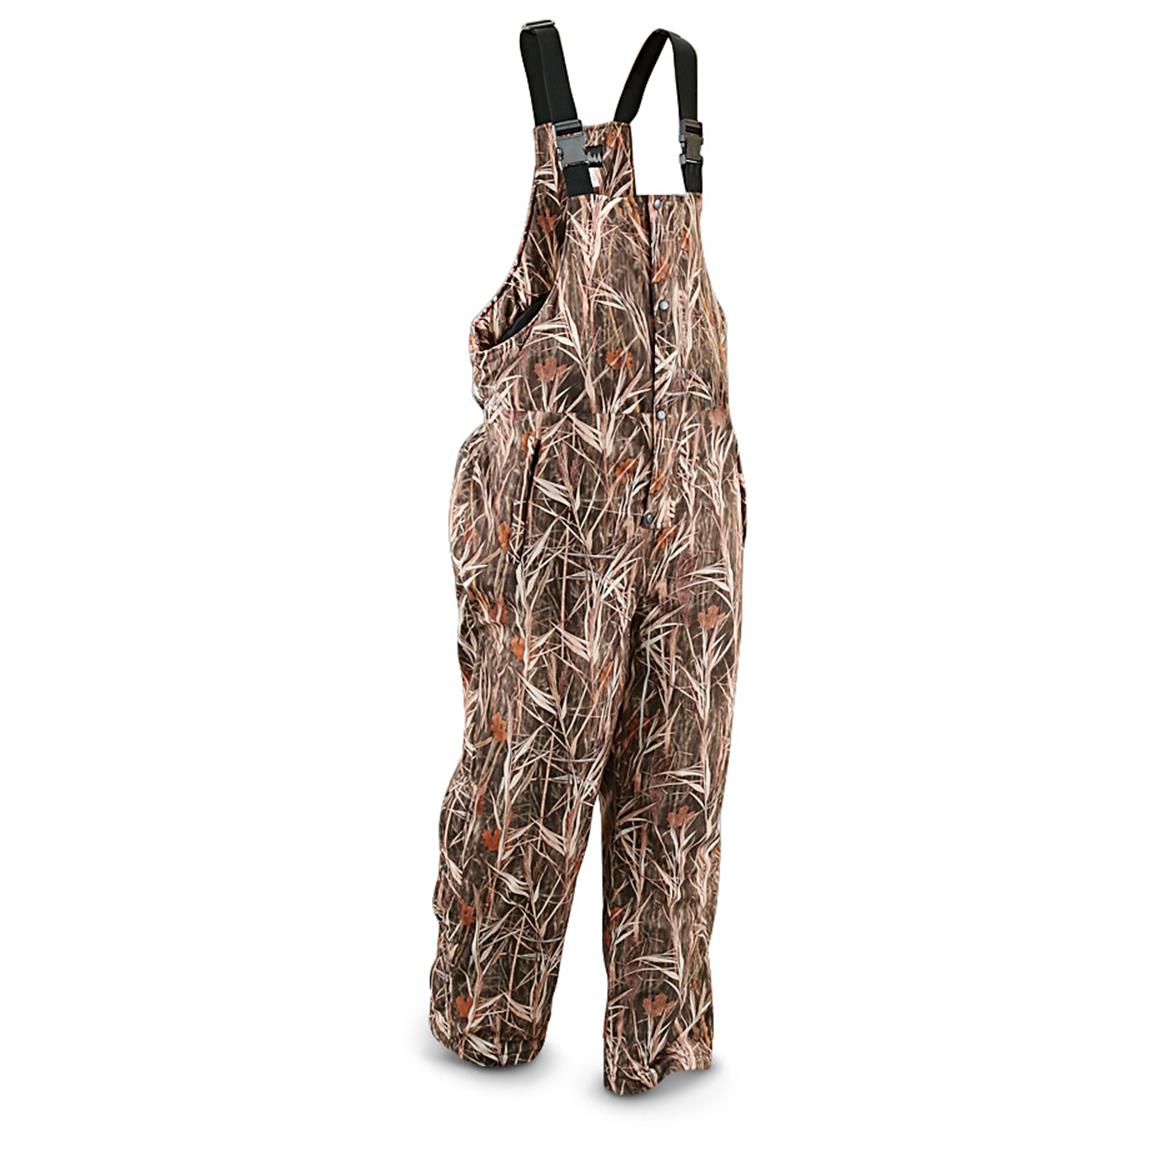 WFS Insulated Waterfowl Bibs - 609560, Camo Overalls & Coveralls at ...